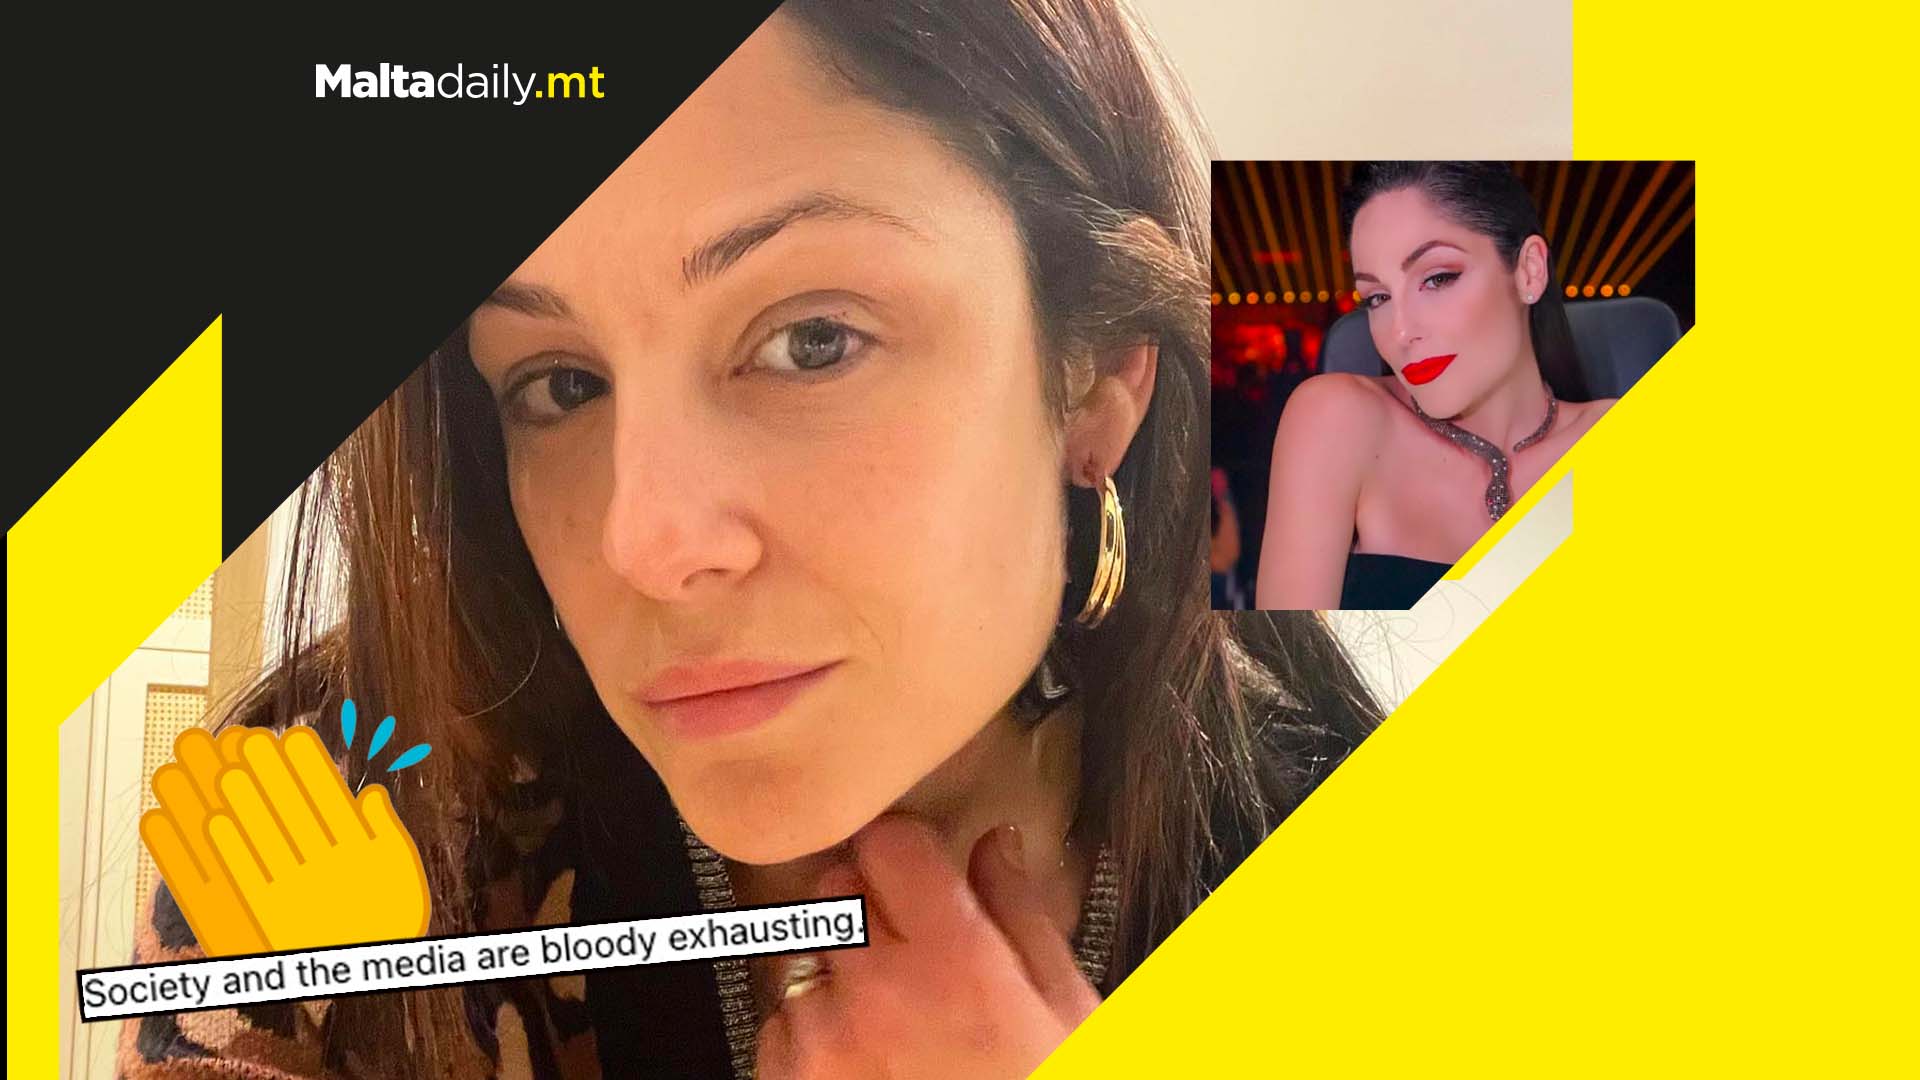 ‘It’s ok to not be made up every single day’ - Ira Losco speaks out